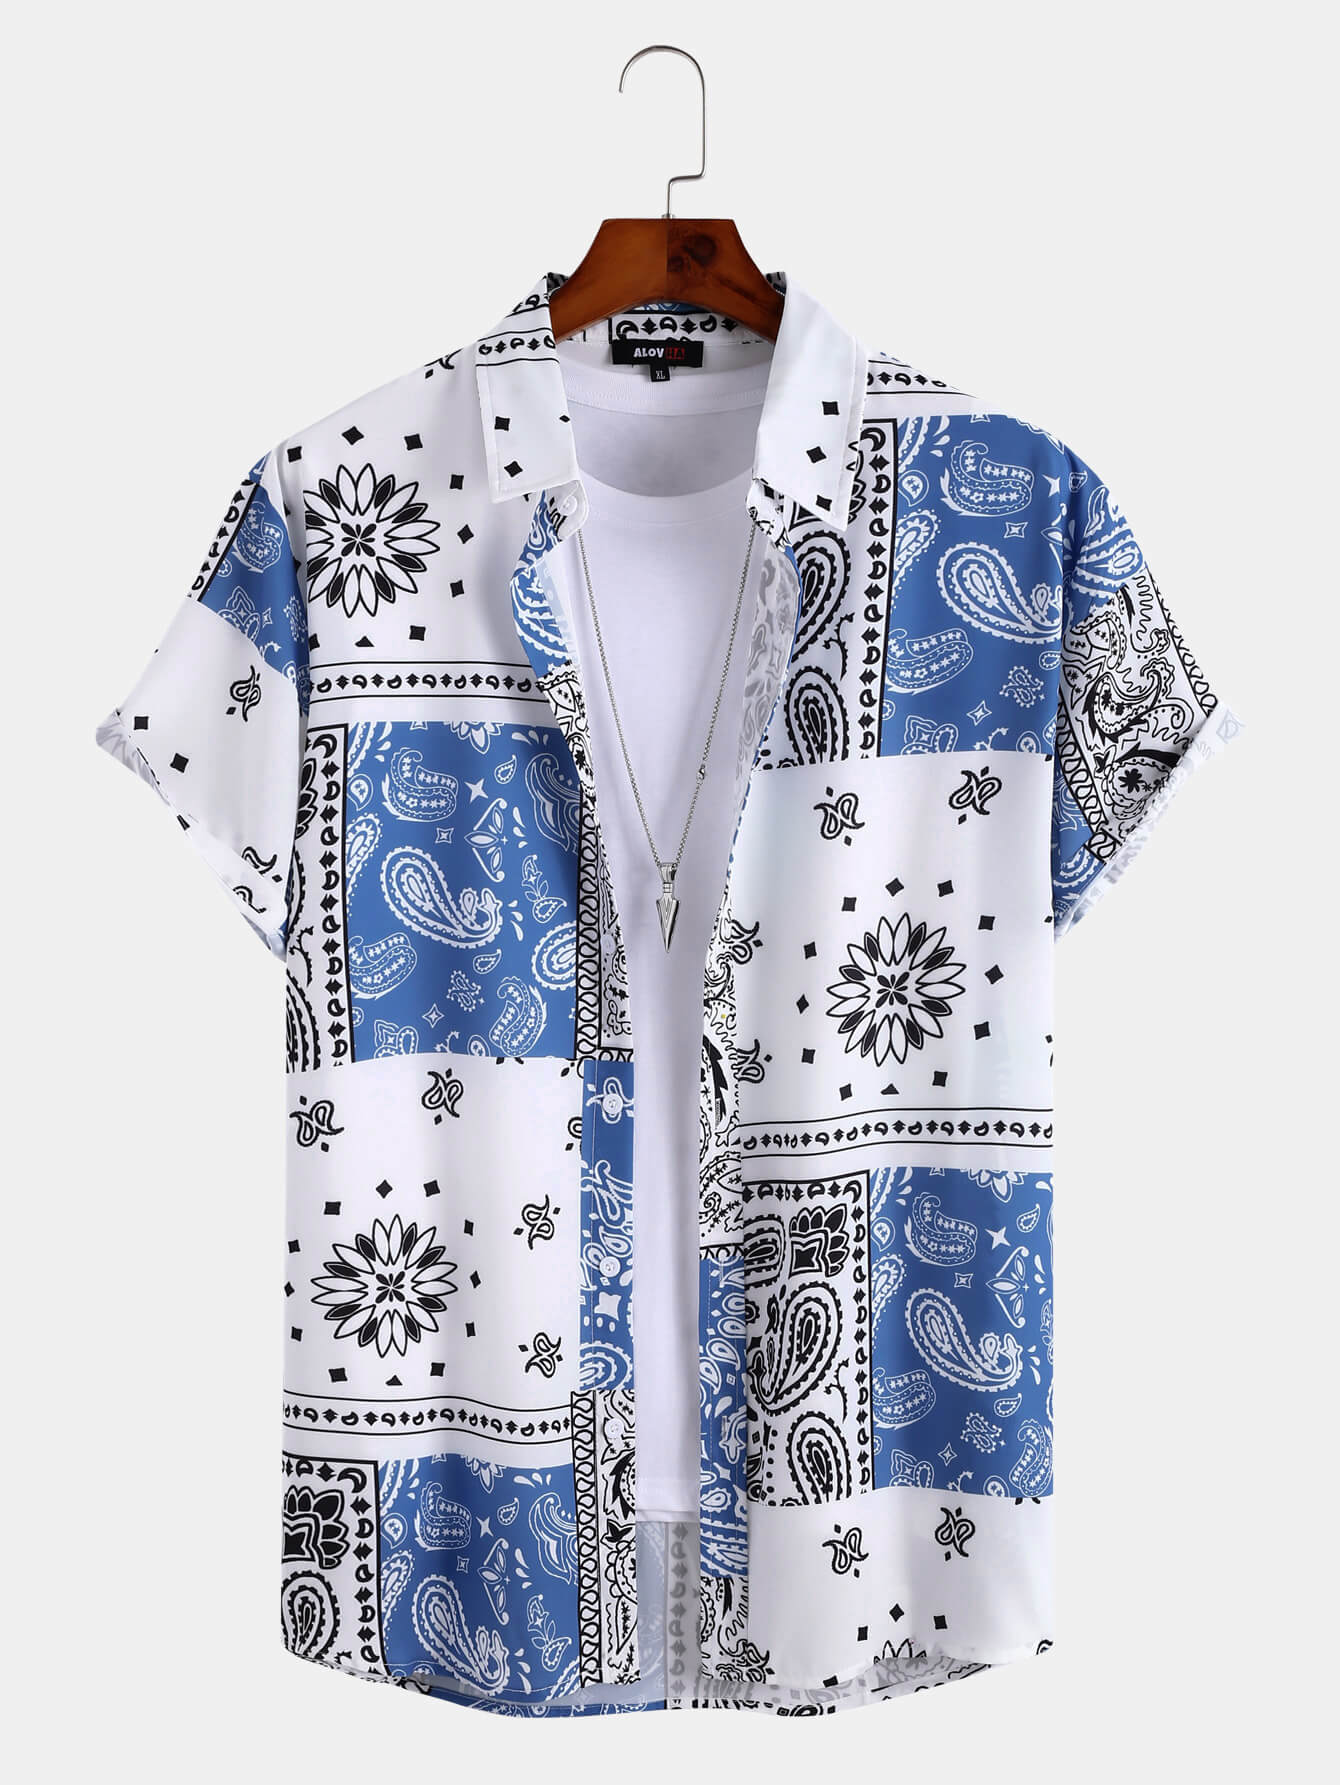 Mens Floral Paisley Short Sleeve Button Up Collared Vacation Shirt